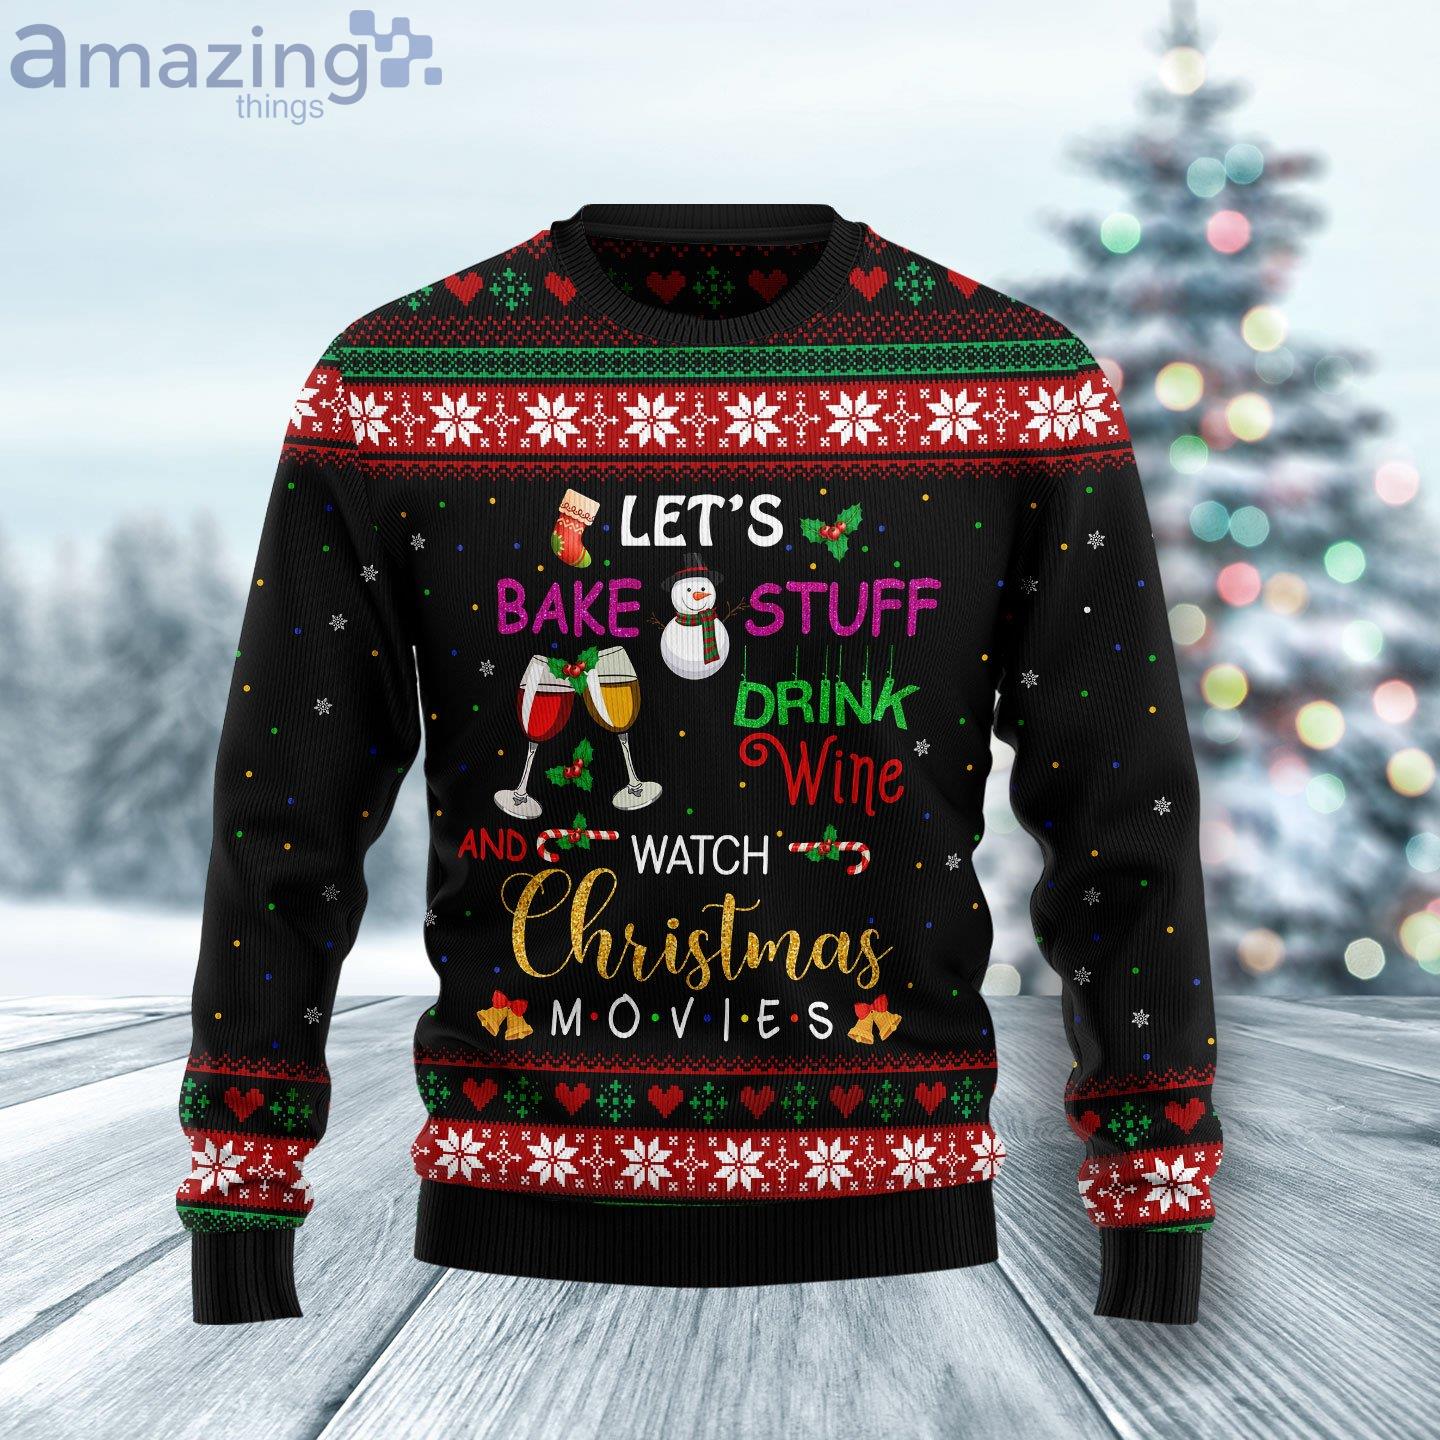 Drink Wine And Watch Christmas Movies Ugly Christmas Sweater Product Photo 1